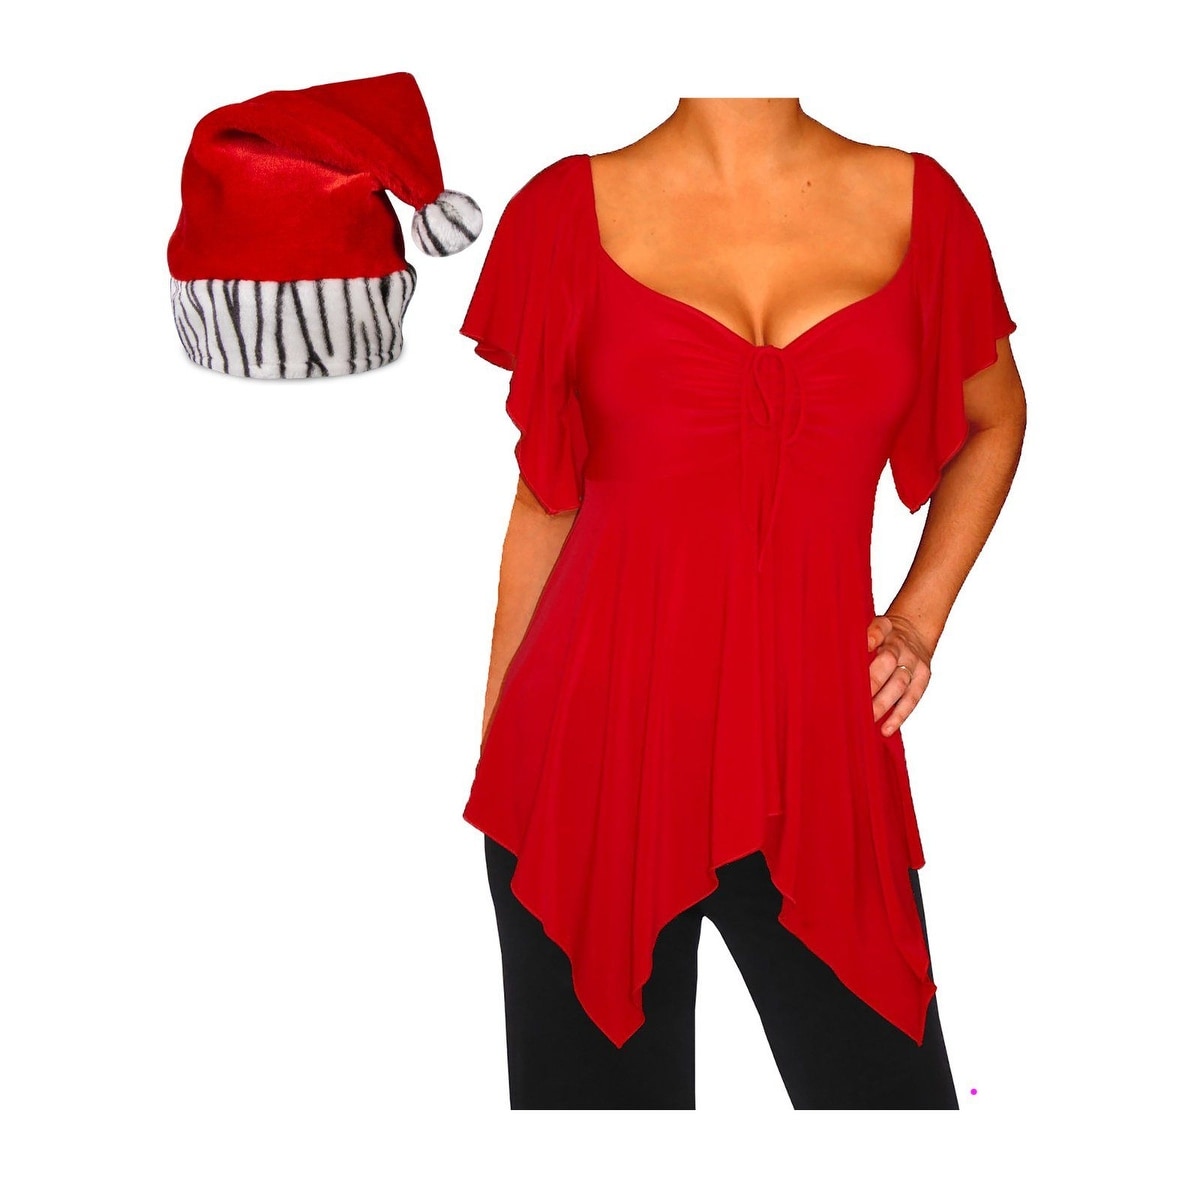 red hat clothing plus size